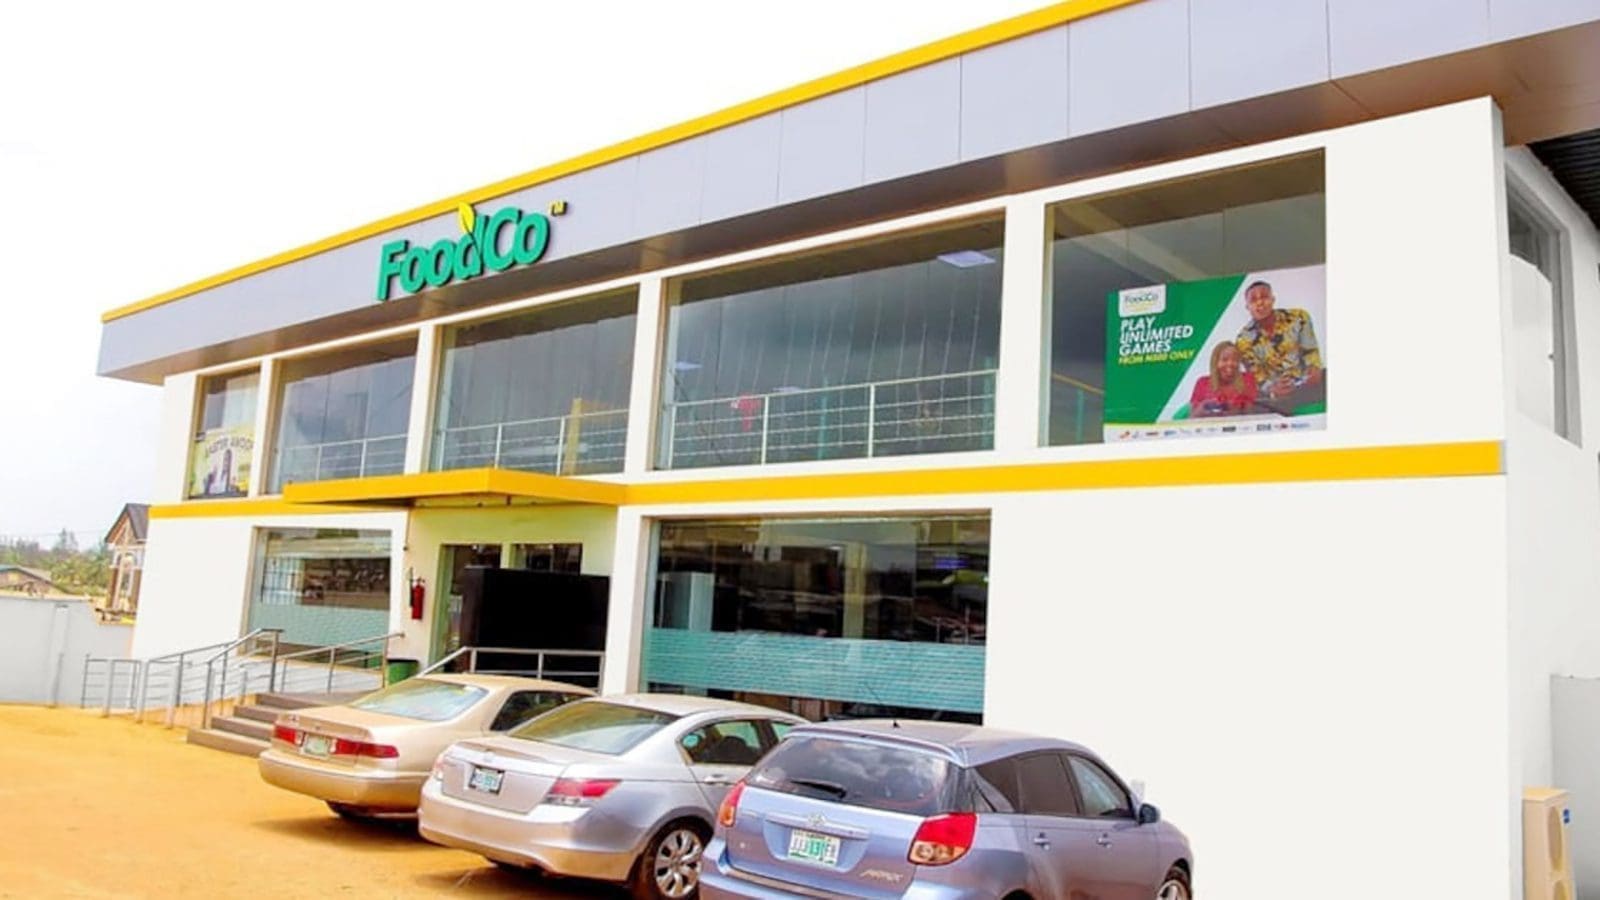 Nigerian omni-channel retailer FoodCo strengthens local presence with new outlet